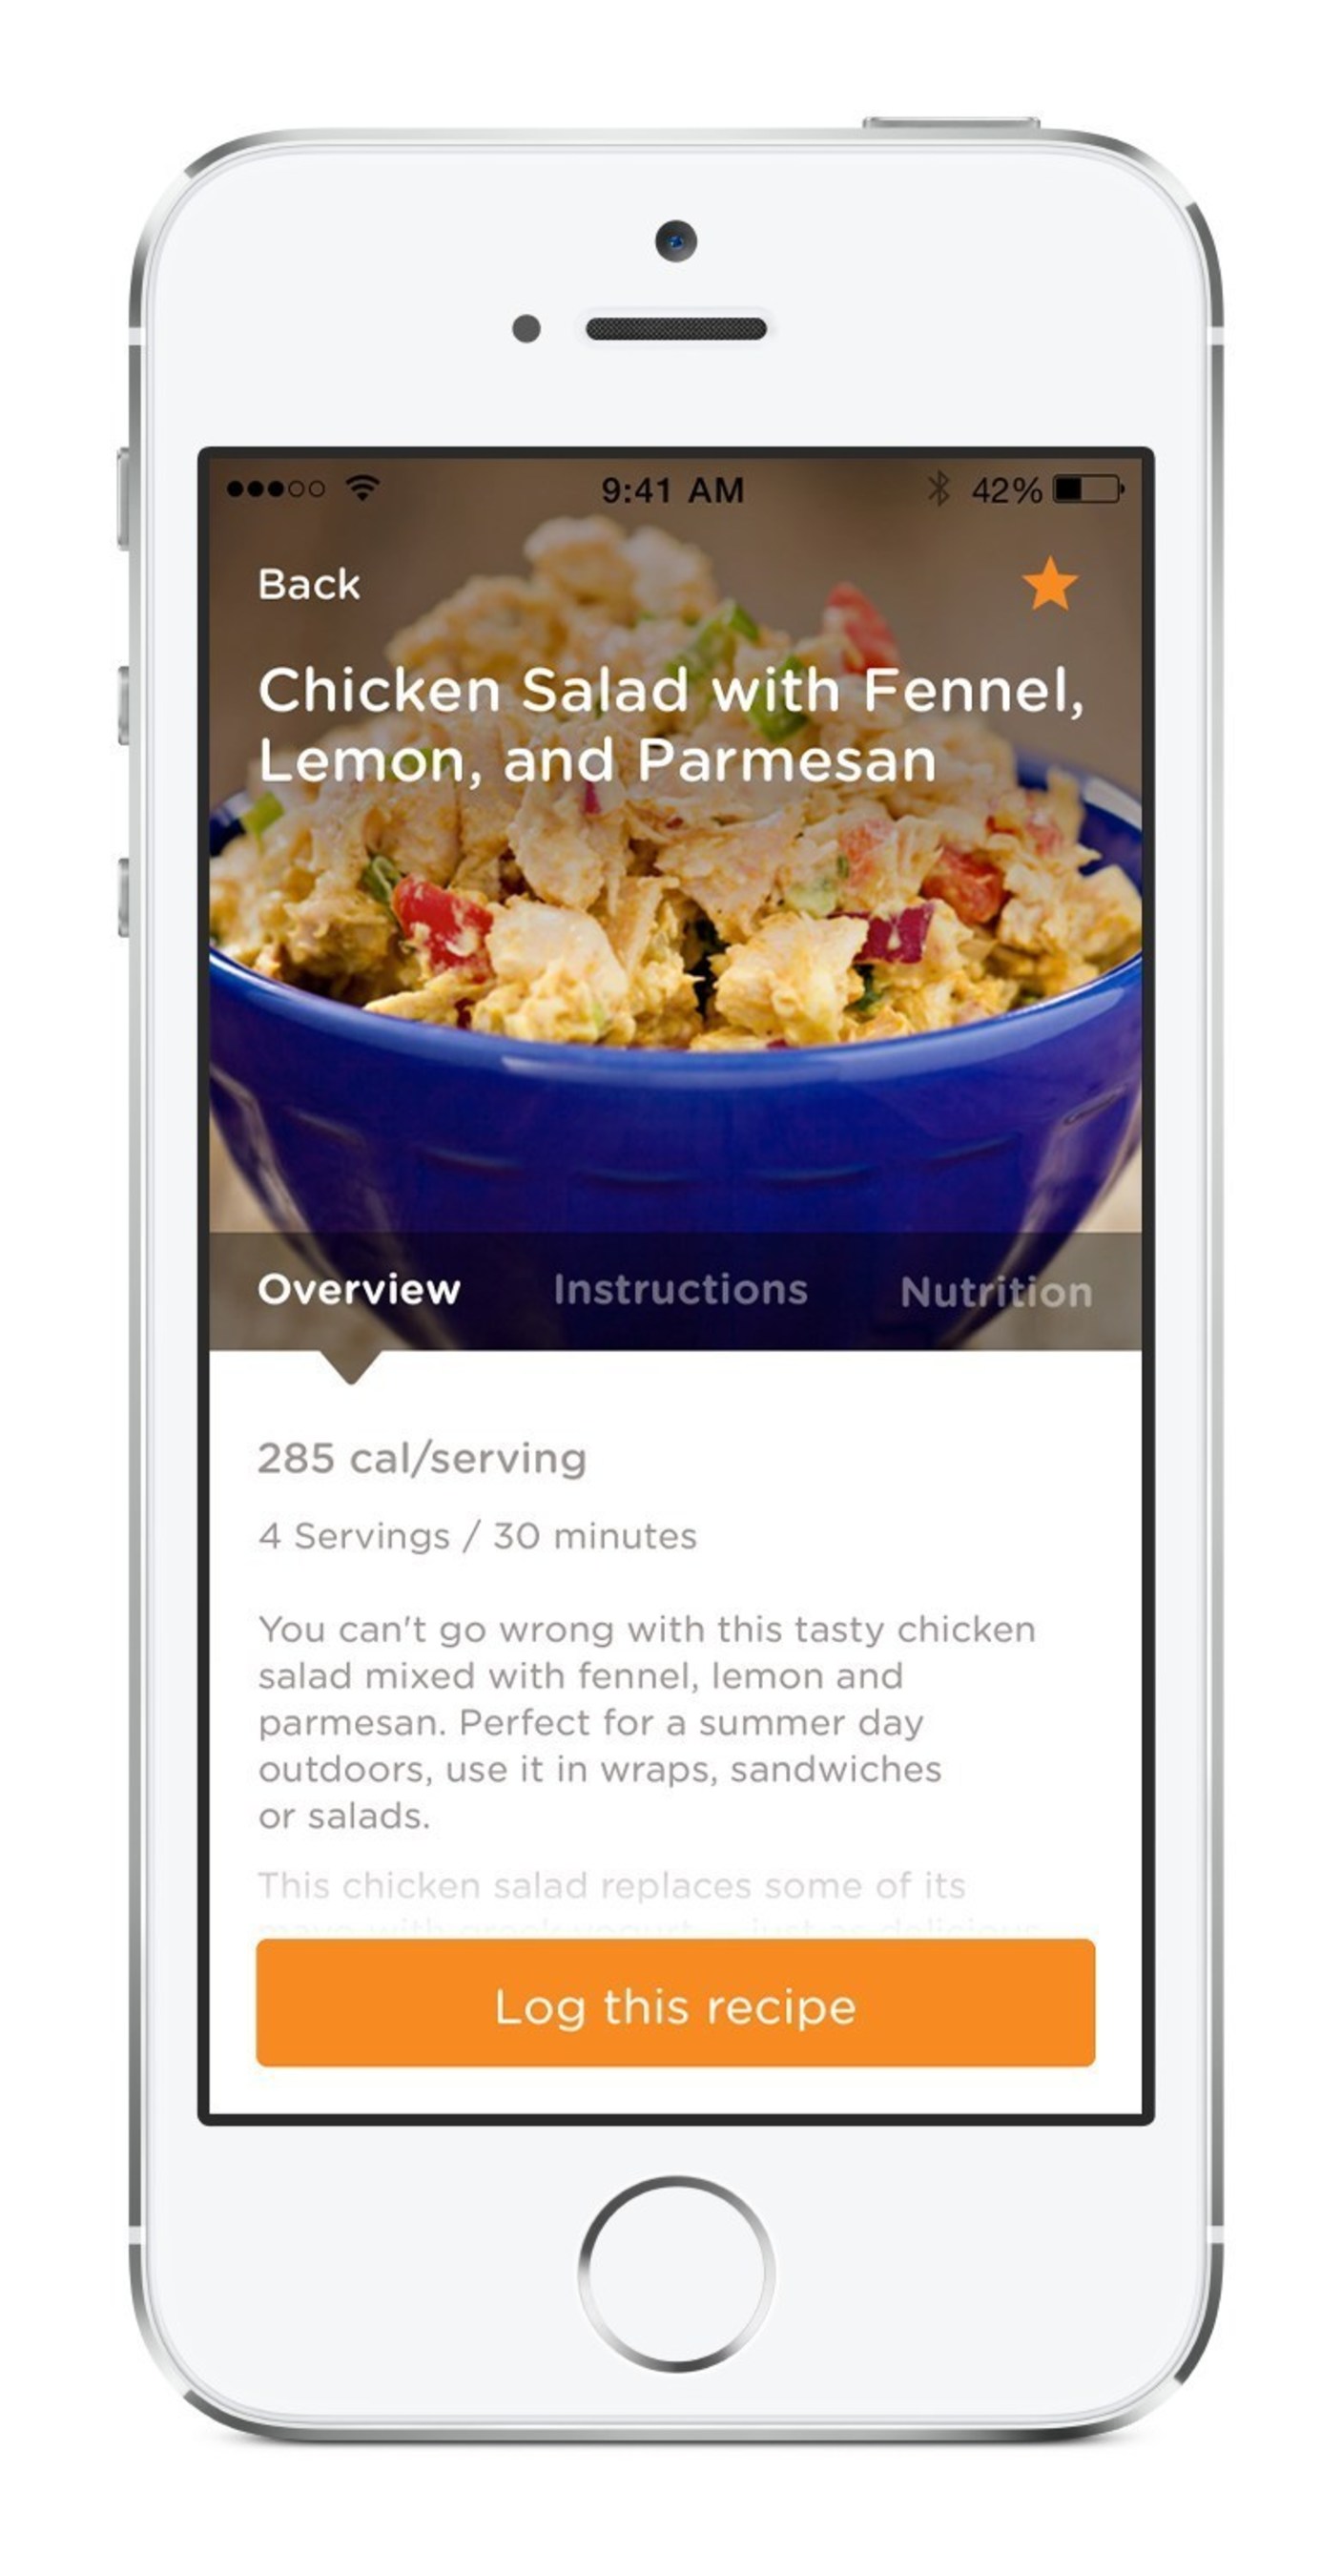 Healthy recipes from Rodale Inc on the Noom Coach weight loss app.